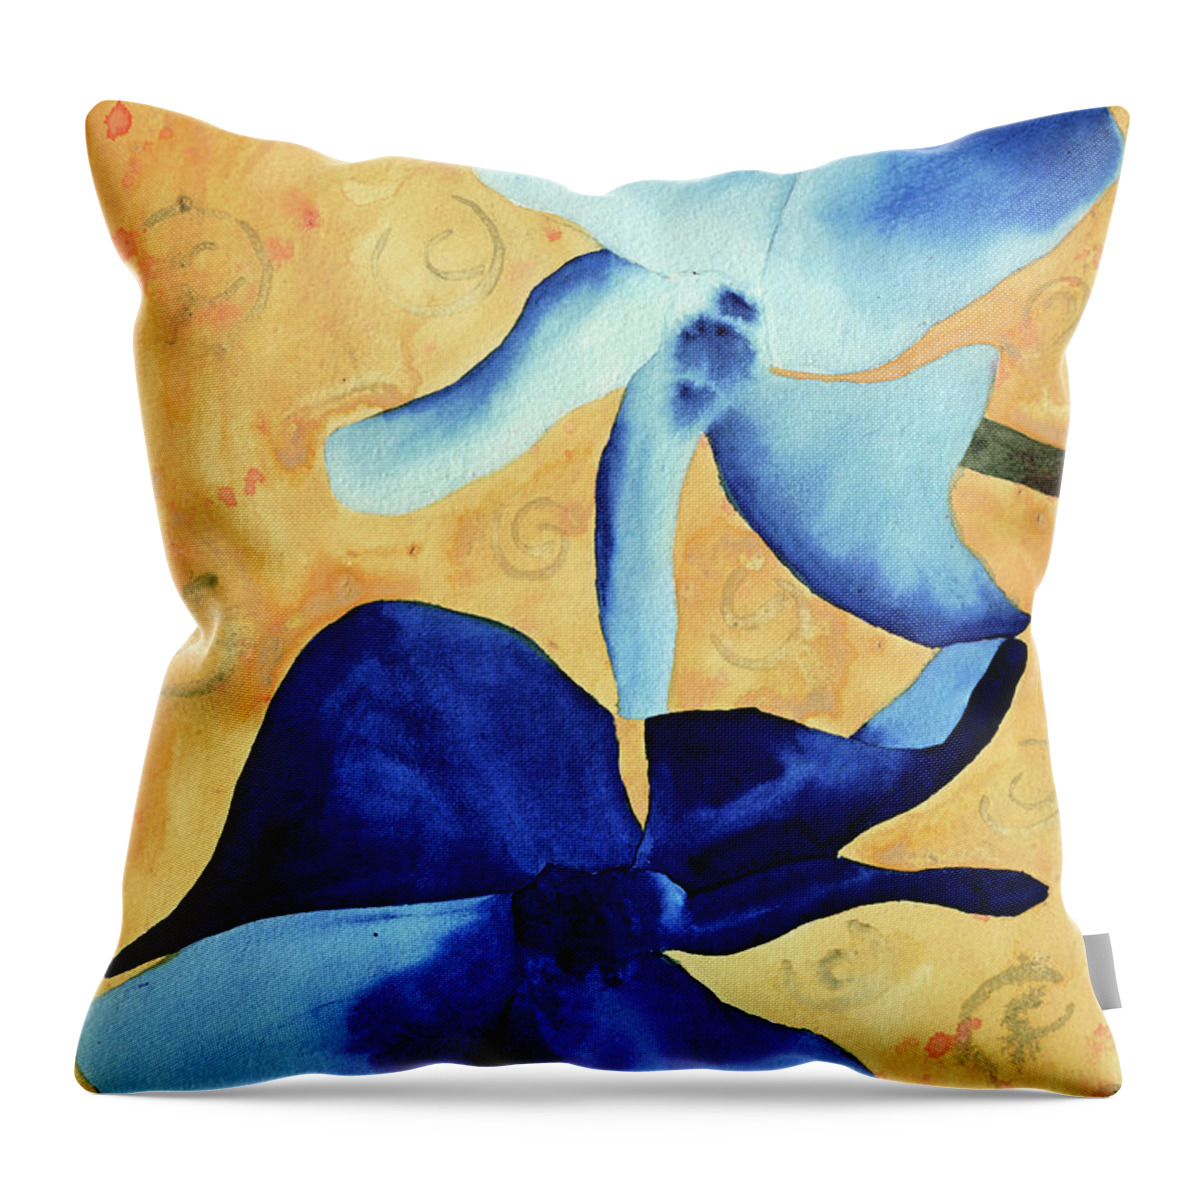 Watercolor Throw Pillow featuring the painting Intoxicating by Ken Powers